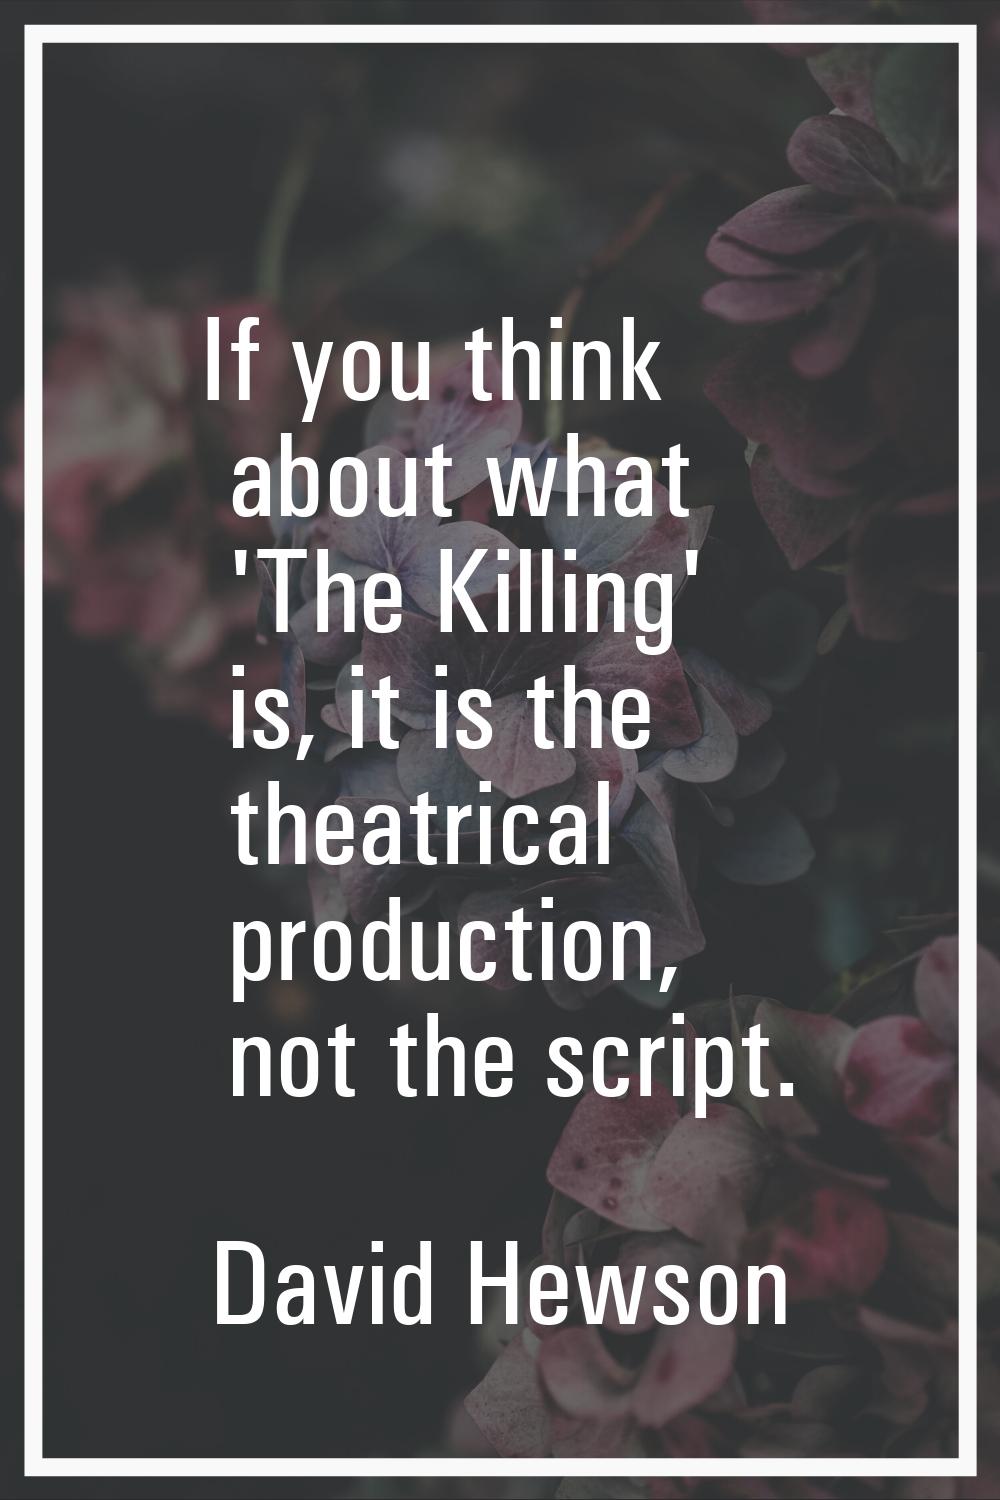 If you think about what 'The Killing' is, it is the theatrical production, not the script.